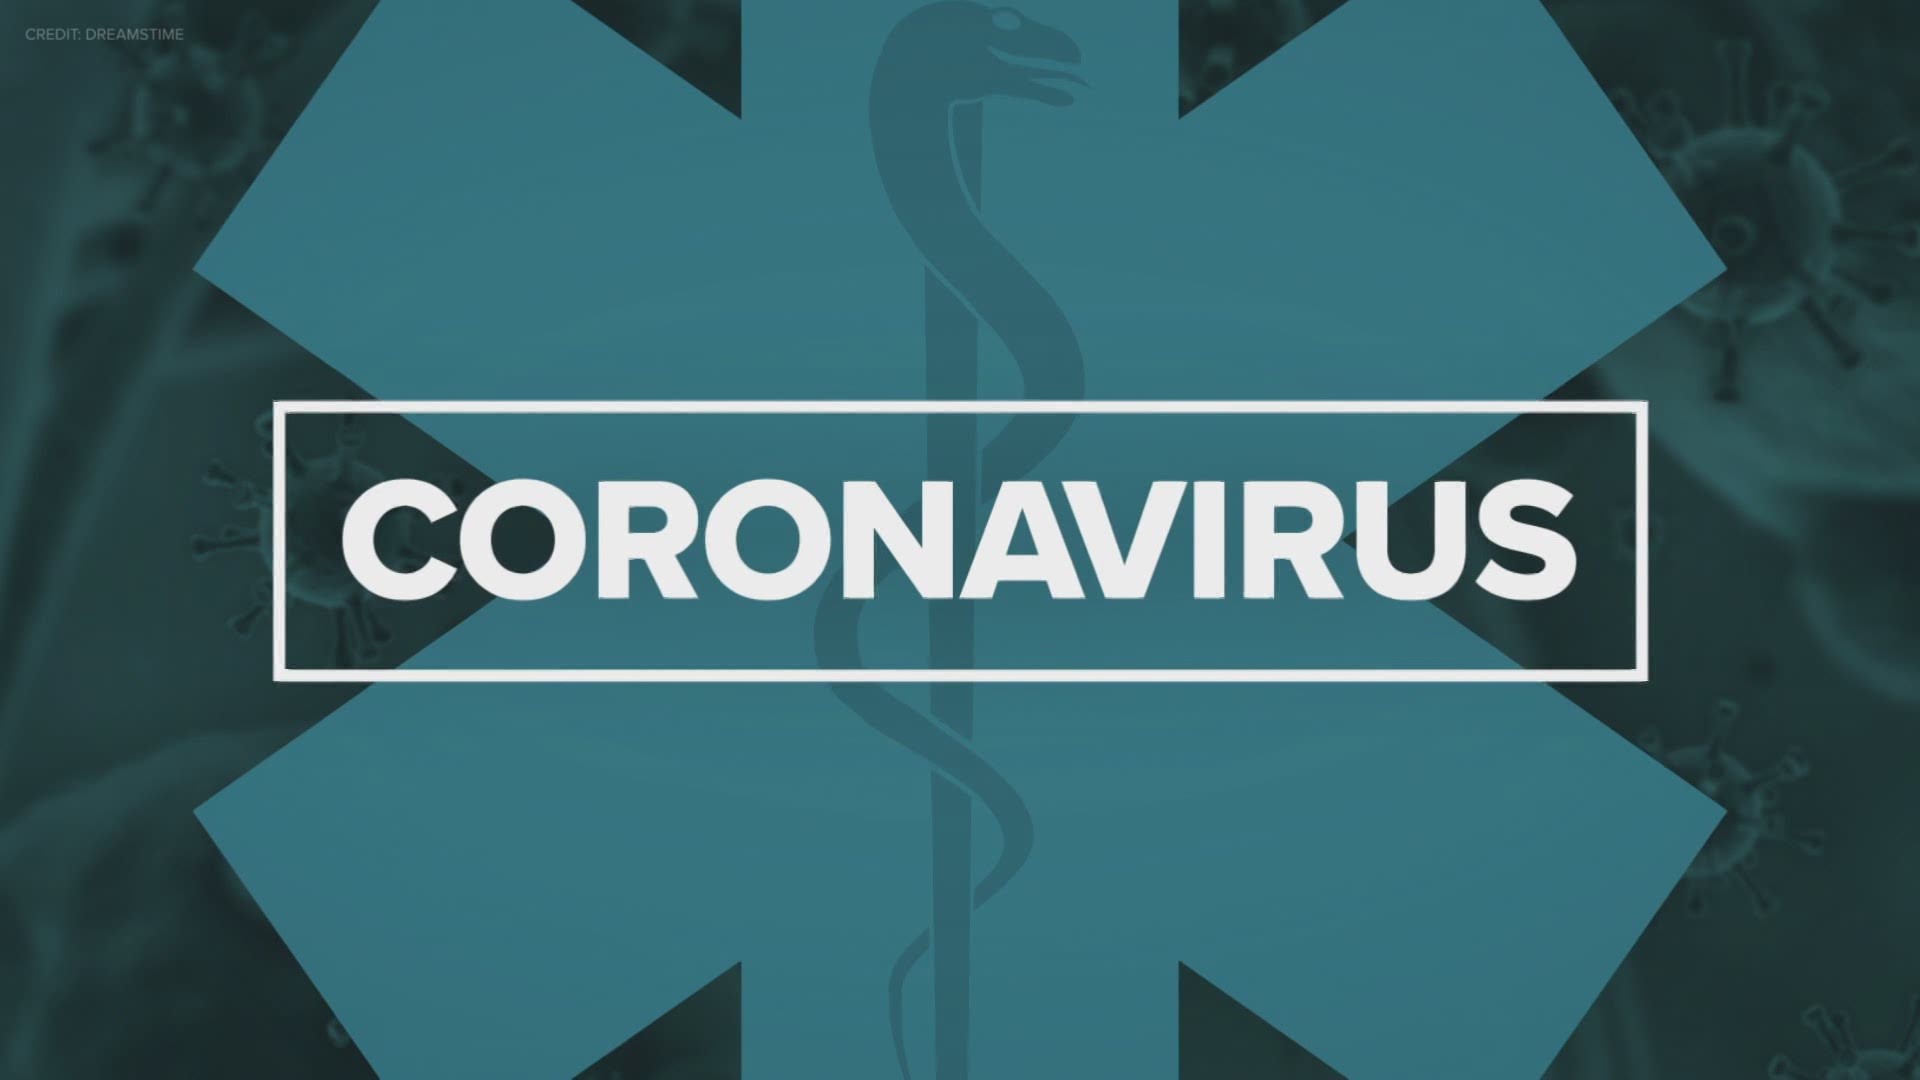 Indiana coronavirus updates: No fans allowed at Indy 500, second wave hitting rural areas like Clinton and Frankfort counties, IU football player tests positive